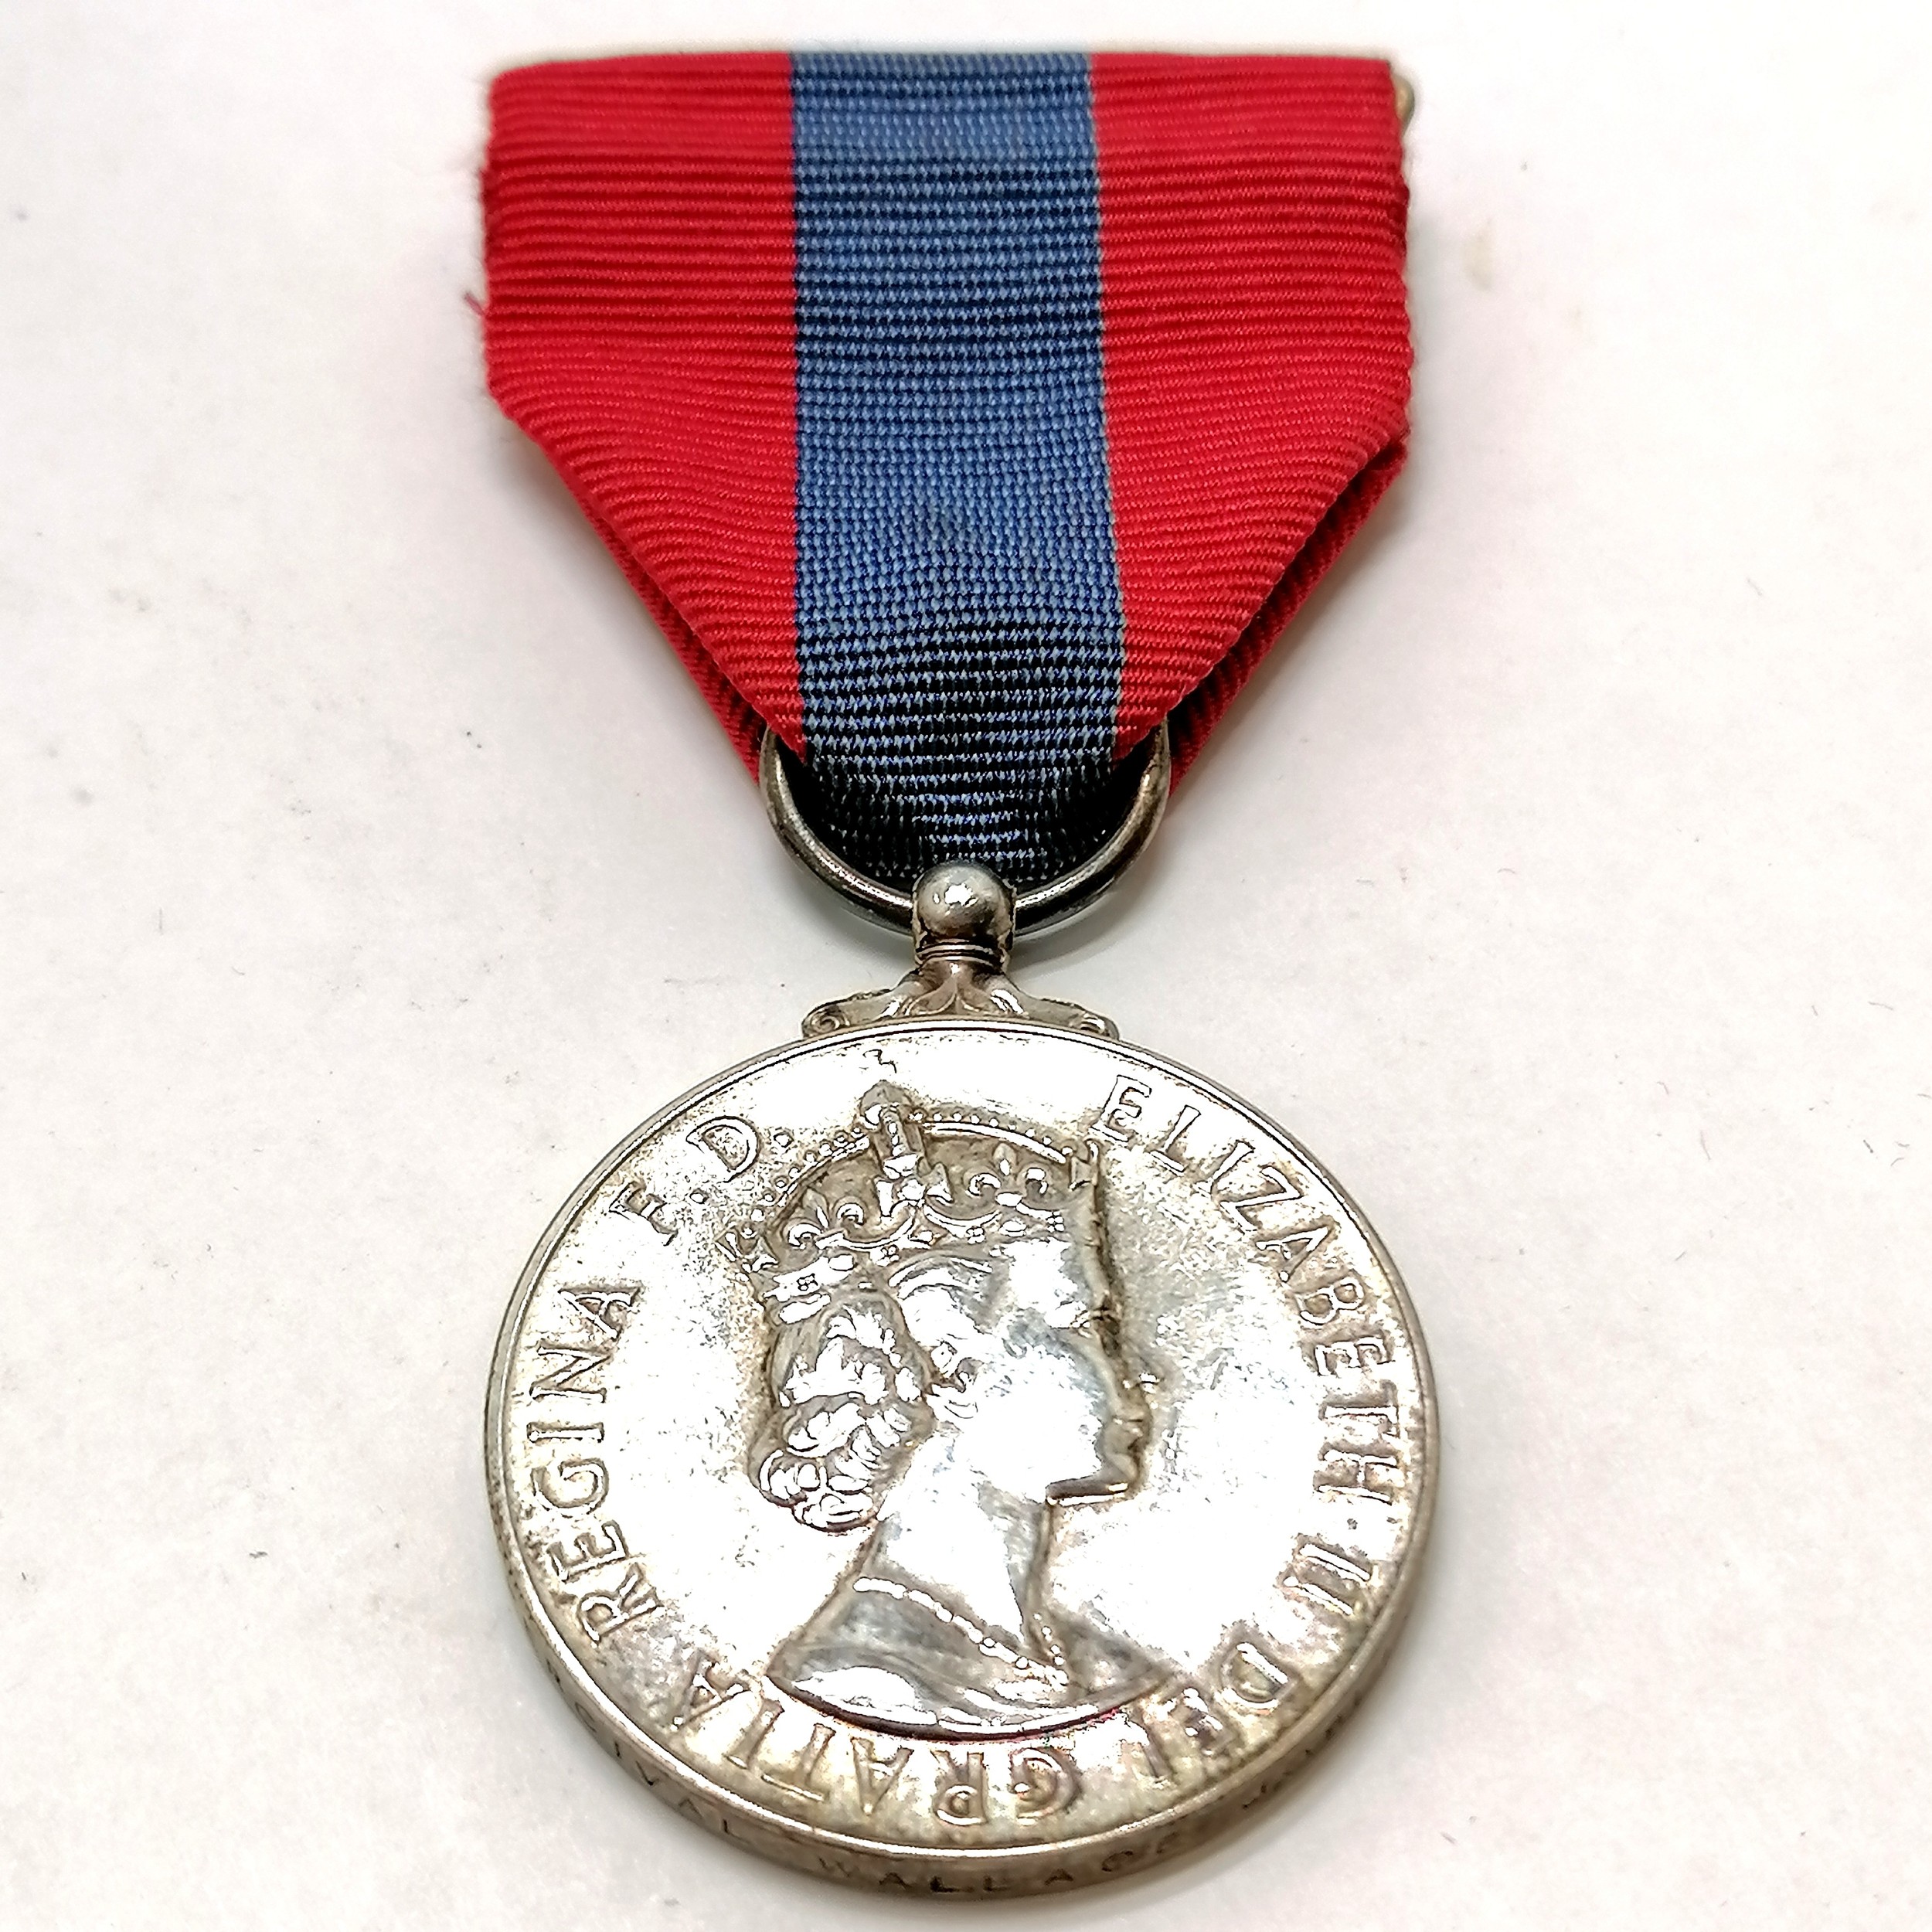 WWI group of medals for Charles Percy Josling (b.1891) - 1914-15 star, British War medal, Victory - Image 3 of 10